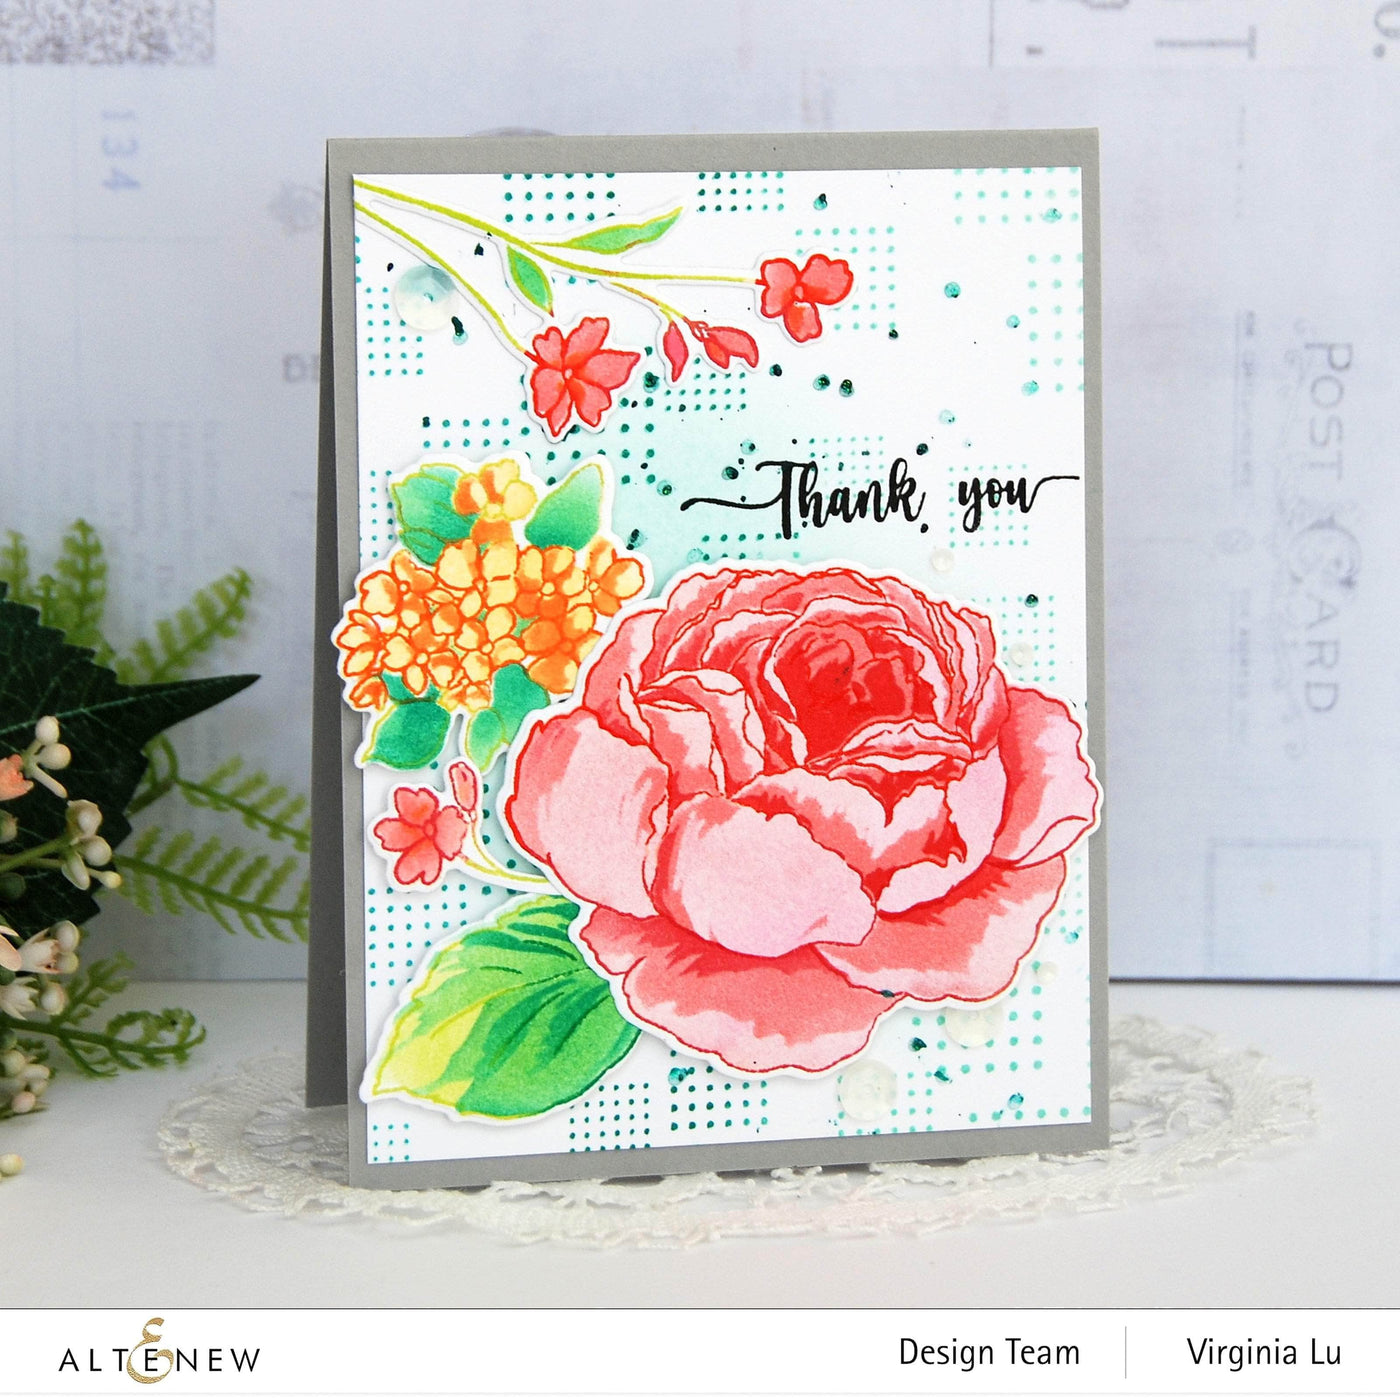 Clear Stamps Dots and Boxes Stamp Set